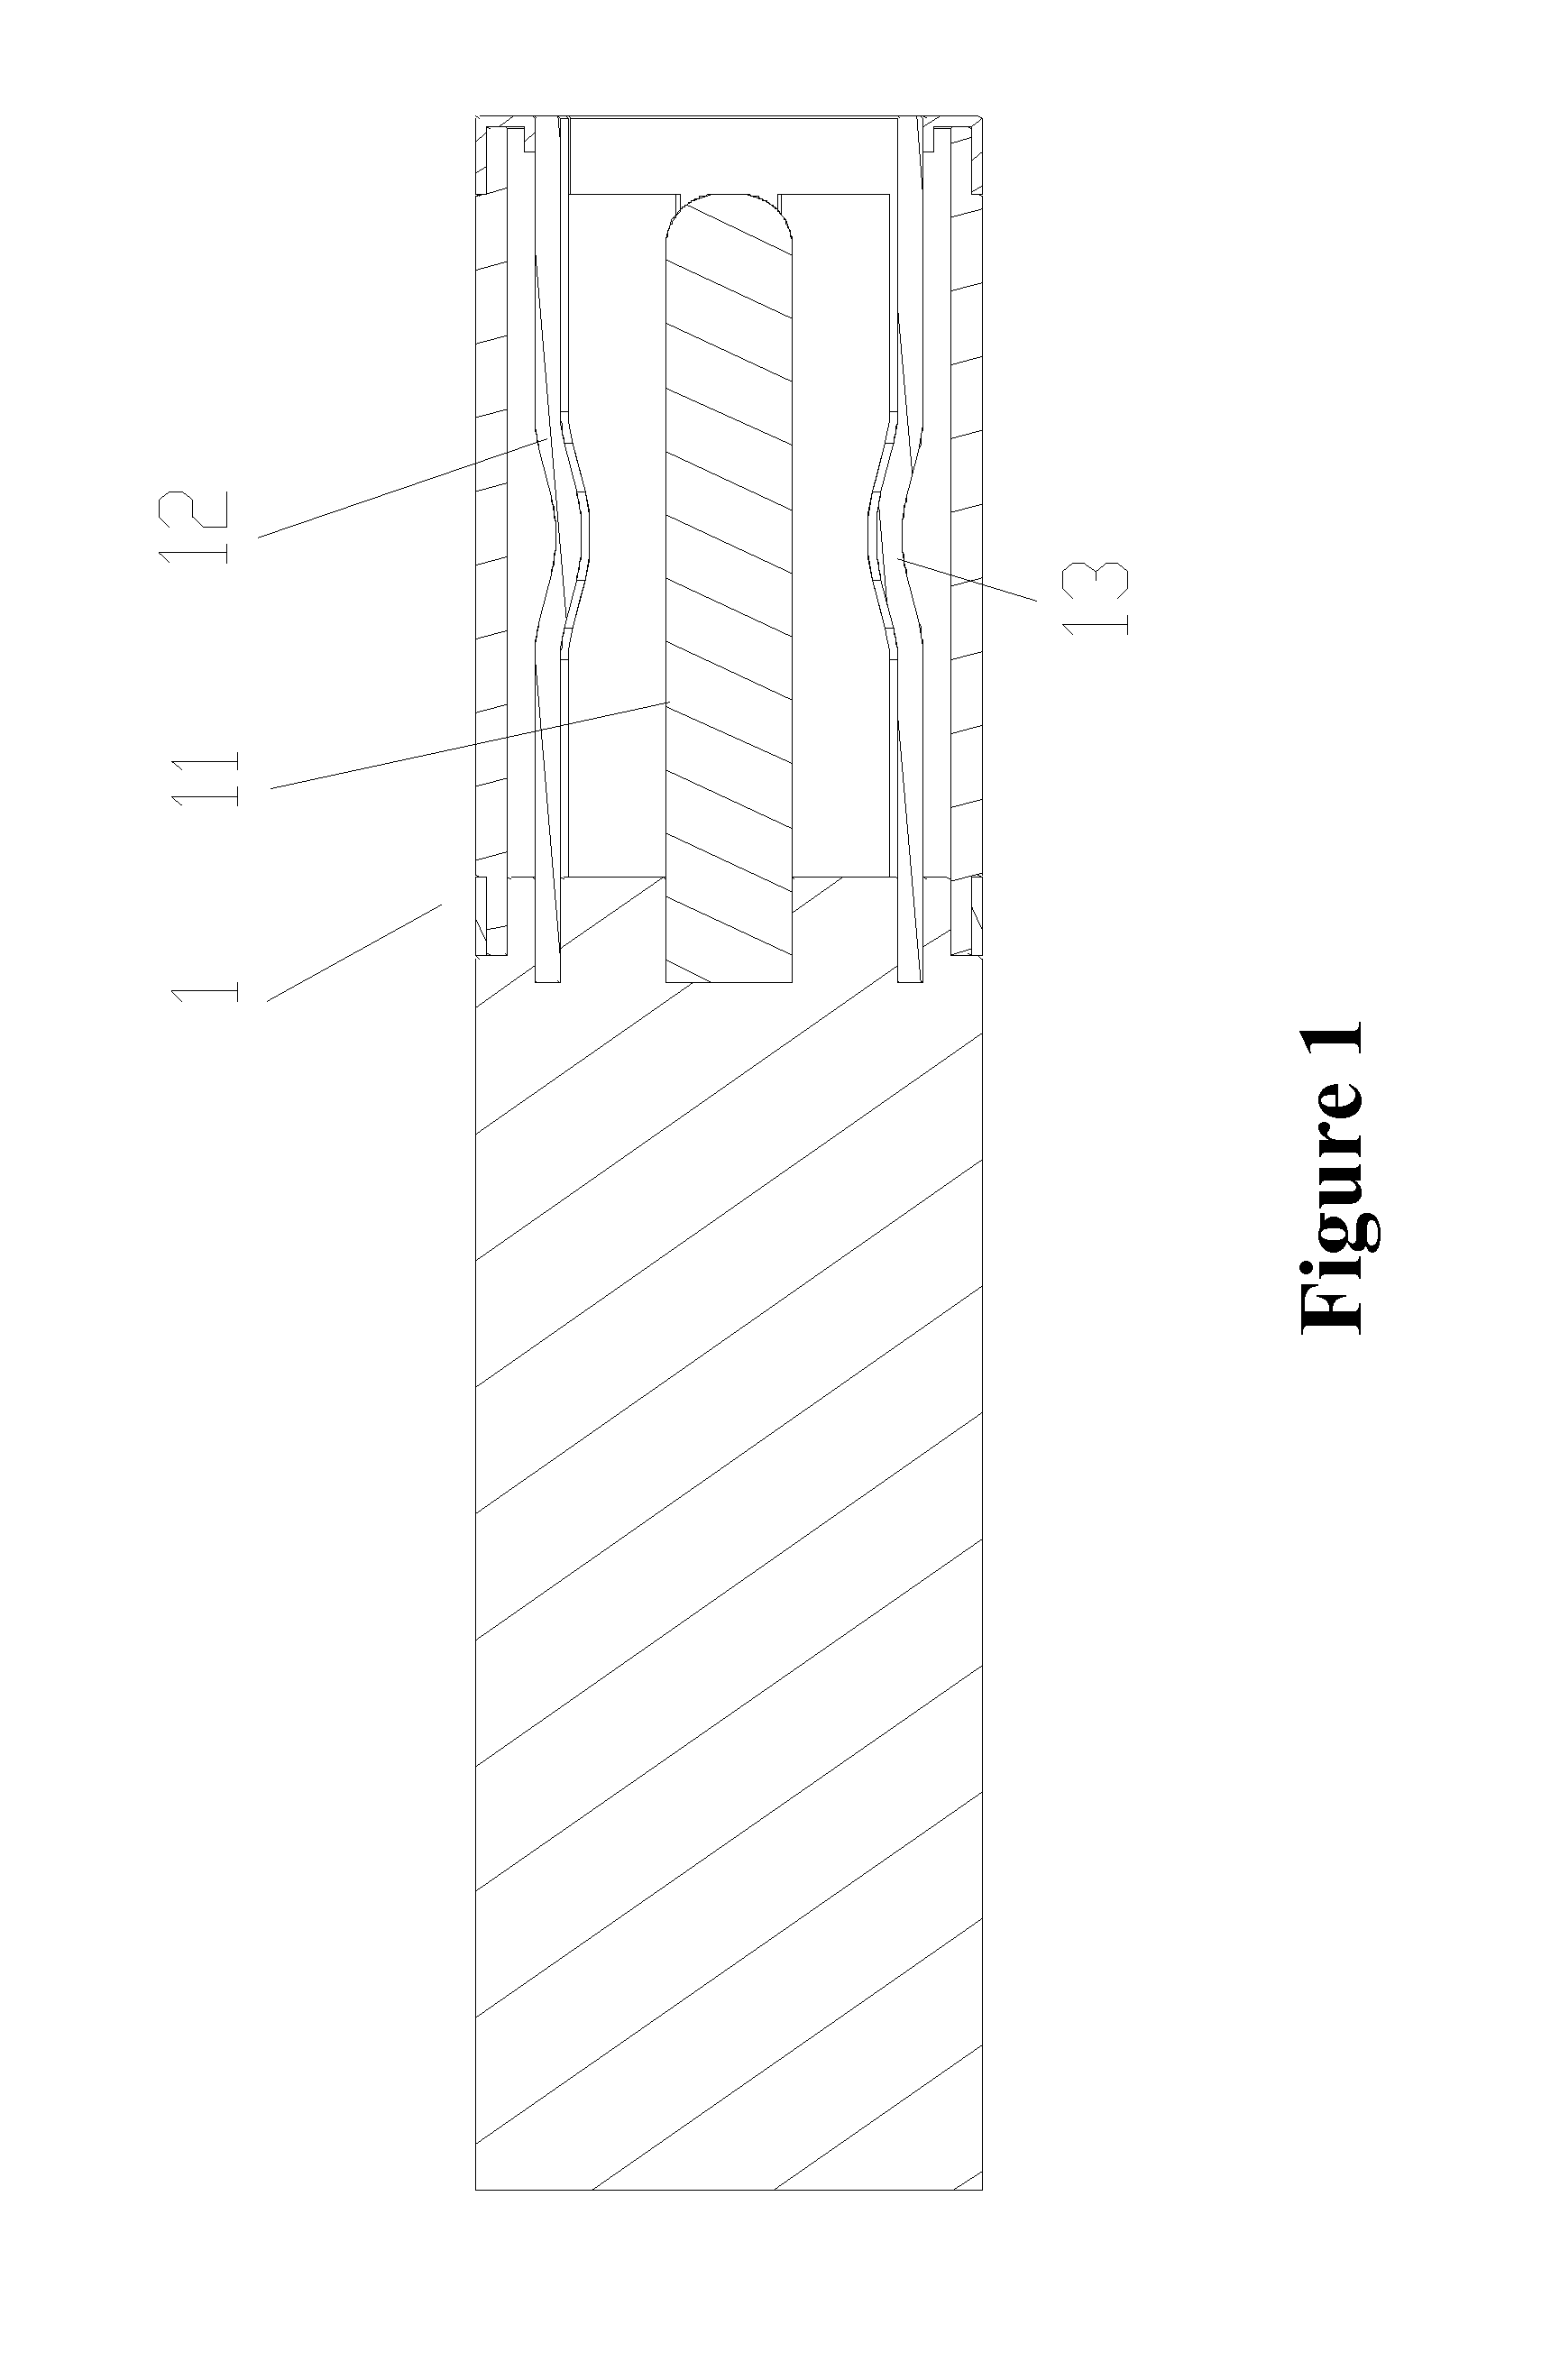 Metal leaf-spring-type connector for electronic cigarette devices